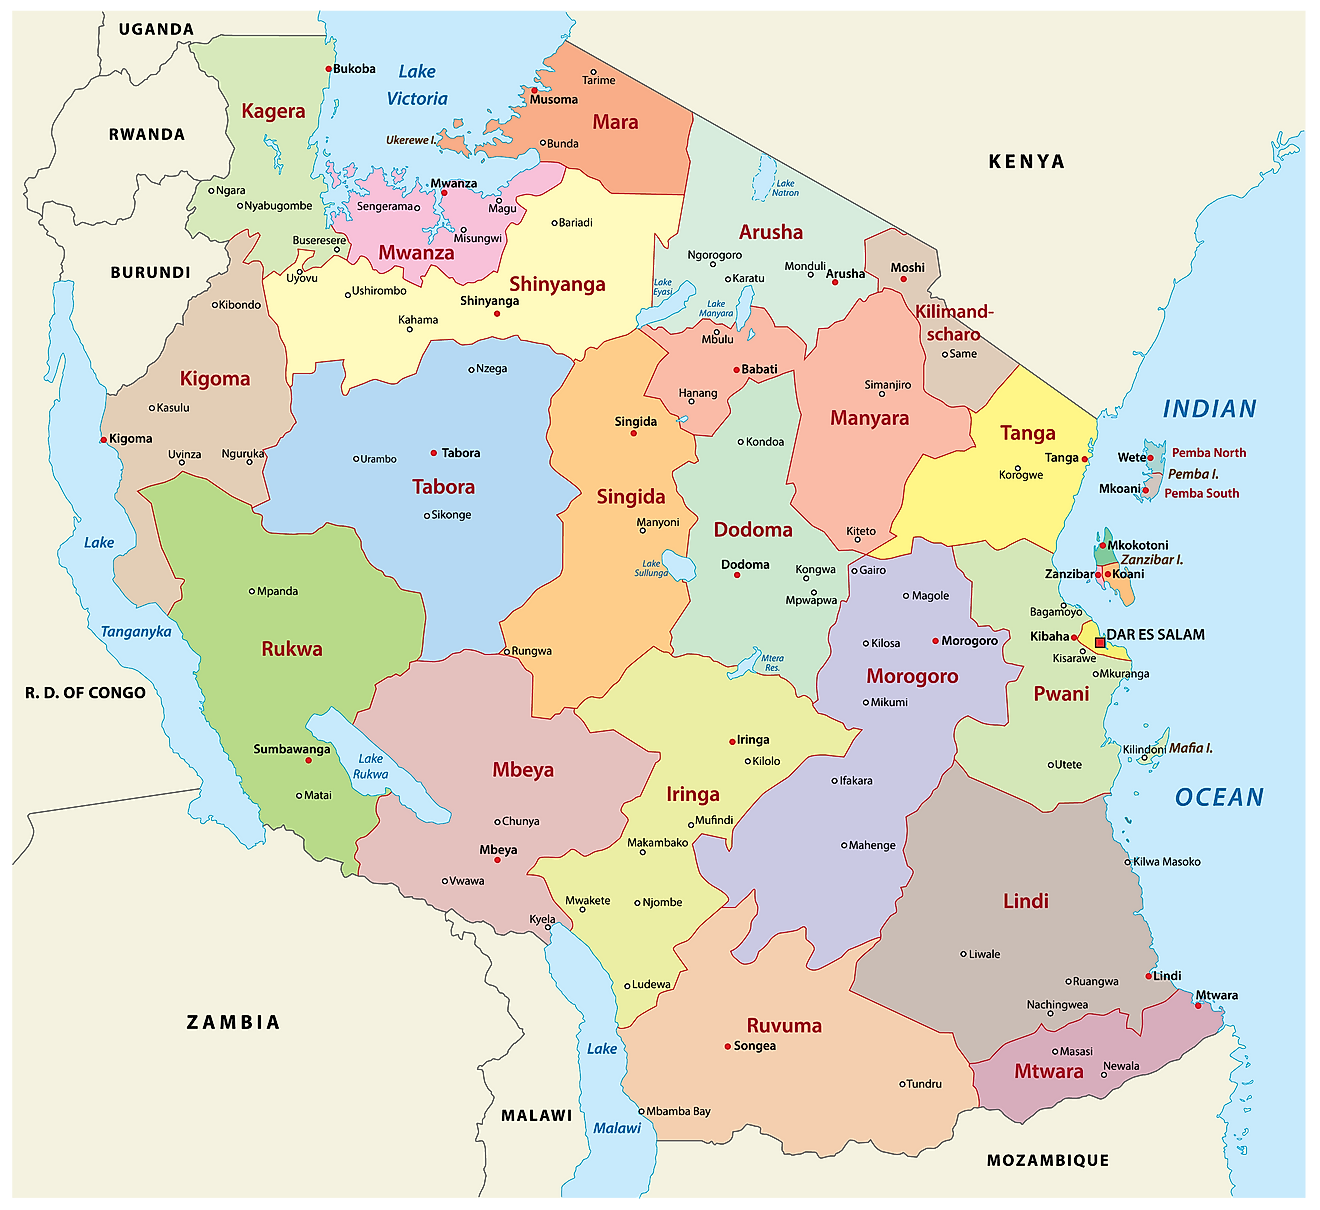 Political Map of Tanzania displaying its 31 regions and their capital cities, and the national capital of Dodoma.